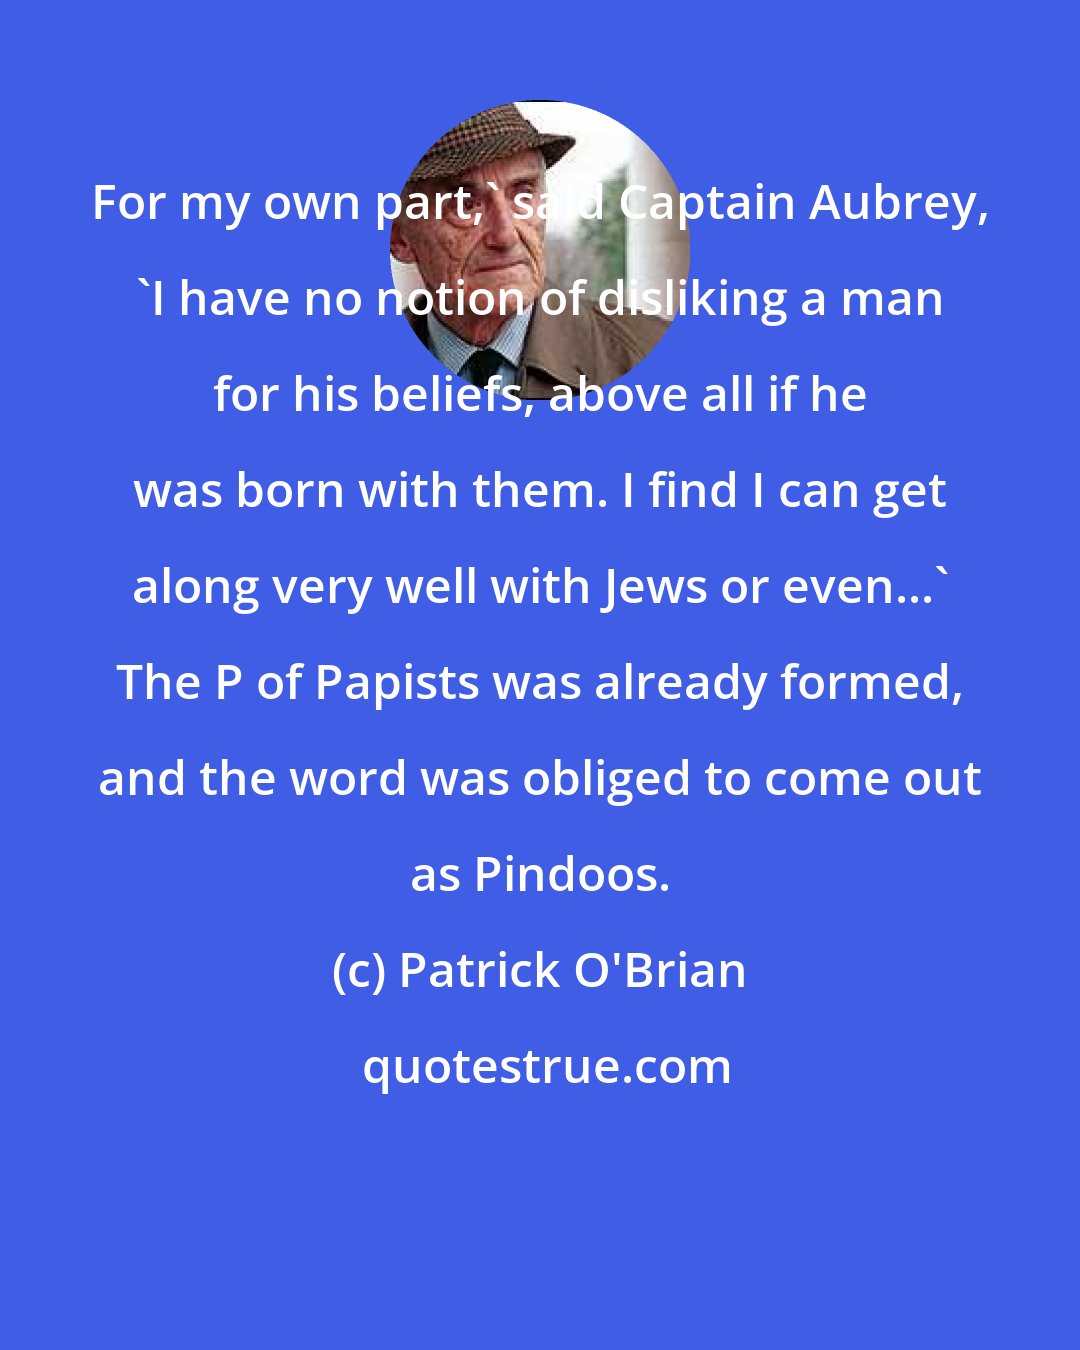 Patrick O'Brian: For my own part,' said Captain Aubrey, 'I have no notion of disliking a man for his beliefs, above all if he was born with them. I find I can get along very well with Jews or even...' The P of Papists was already formed, and the word was obliged to come out as Pindoos.